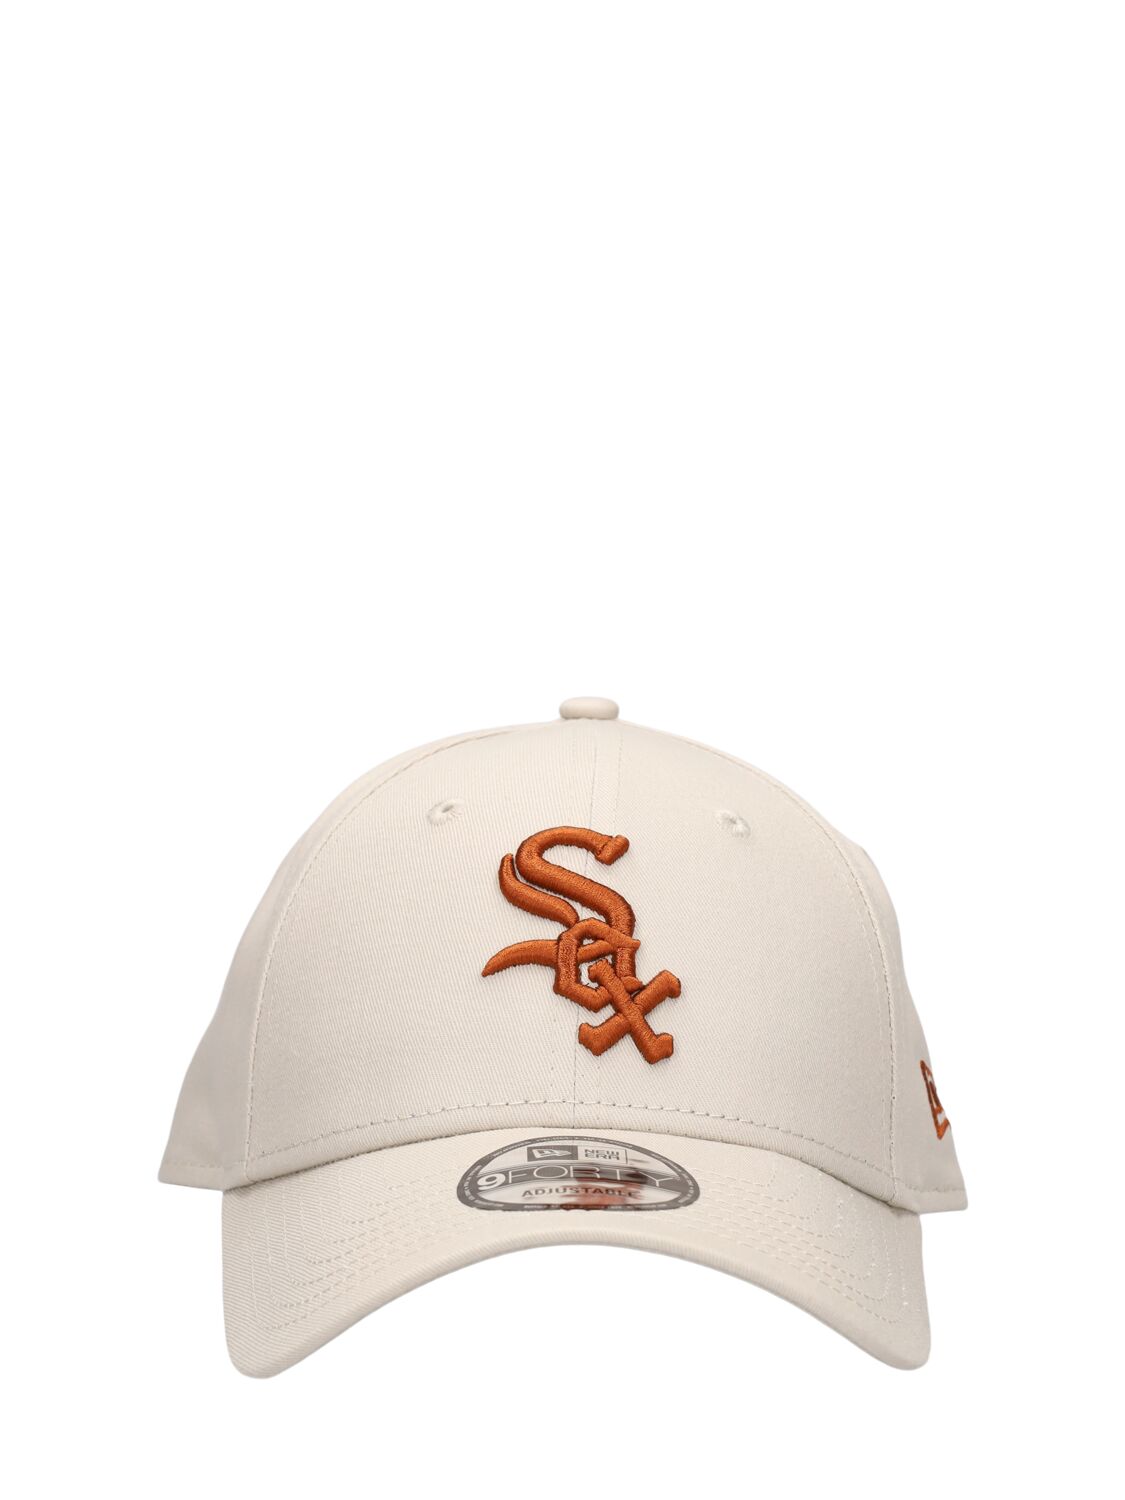 Chicago White Sox 9forty Cotton Cap